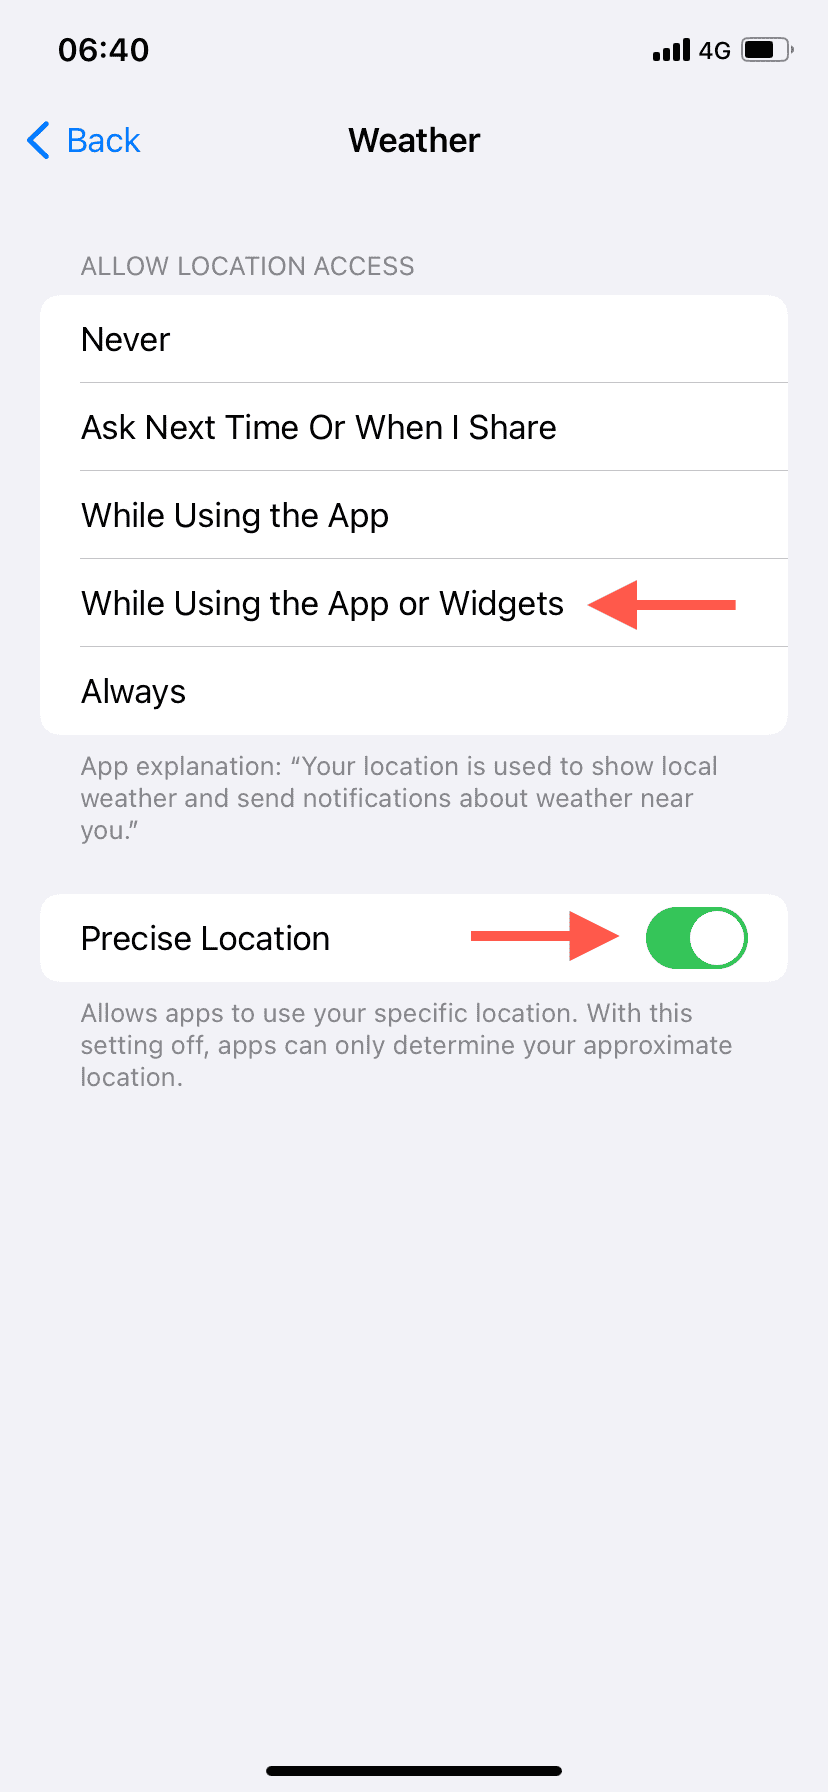 The While Using the App or Widgets and the Precise Location options highlighted in Weather's Location Services.